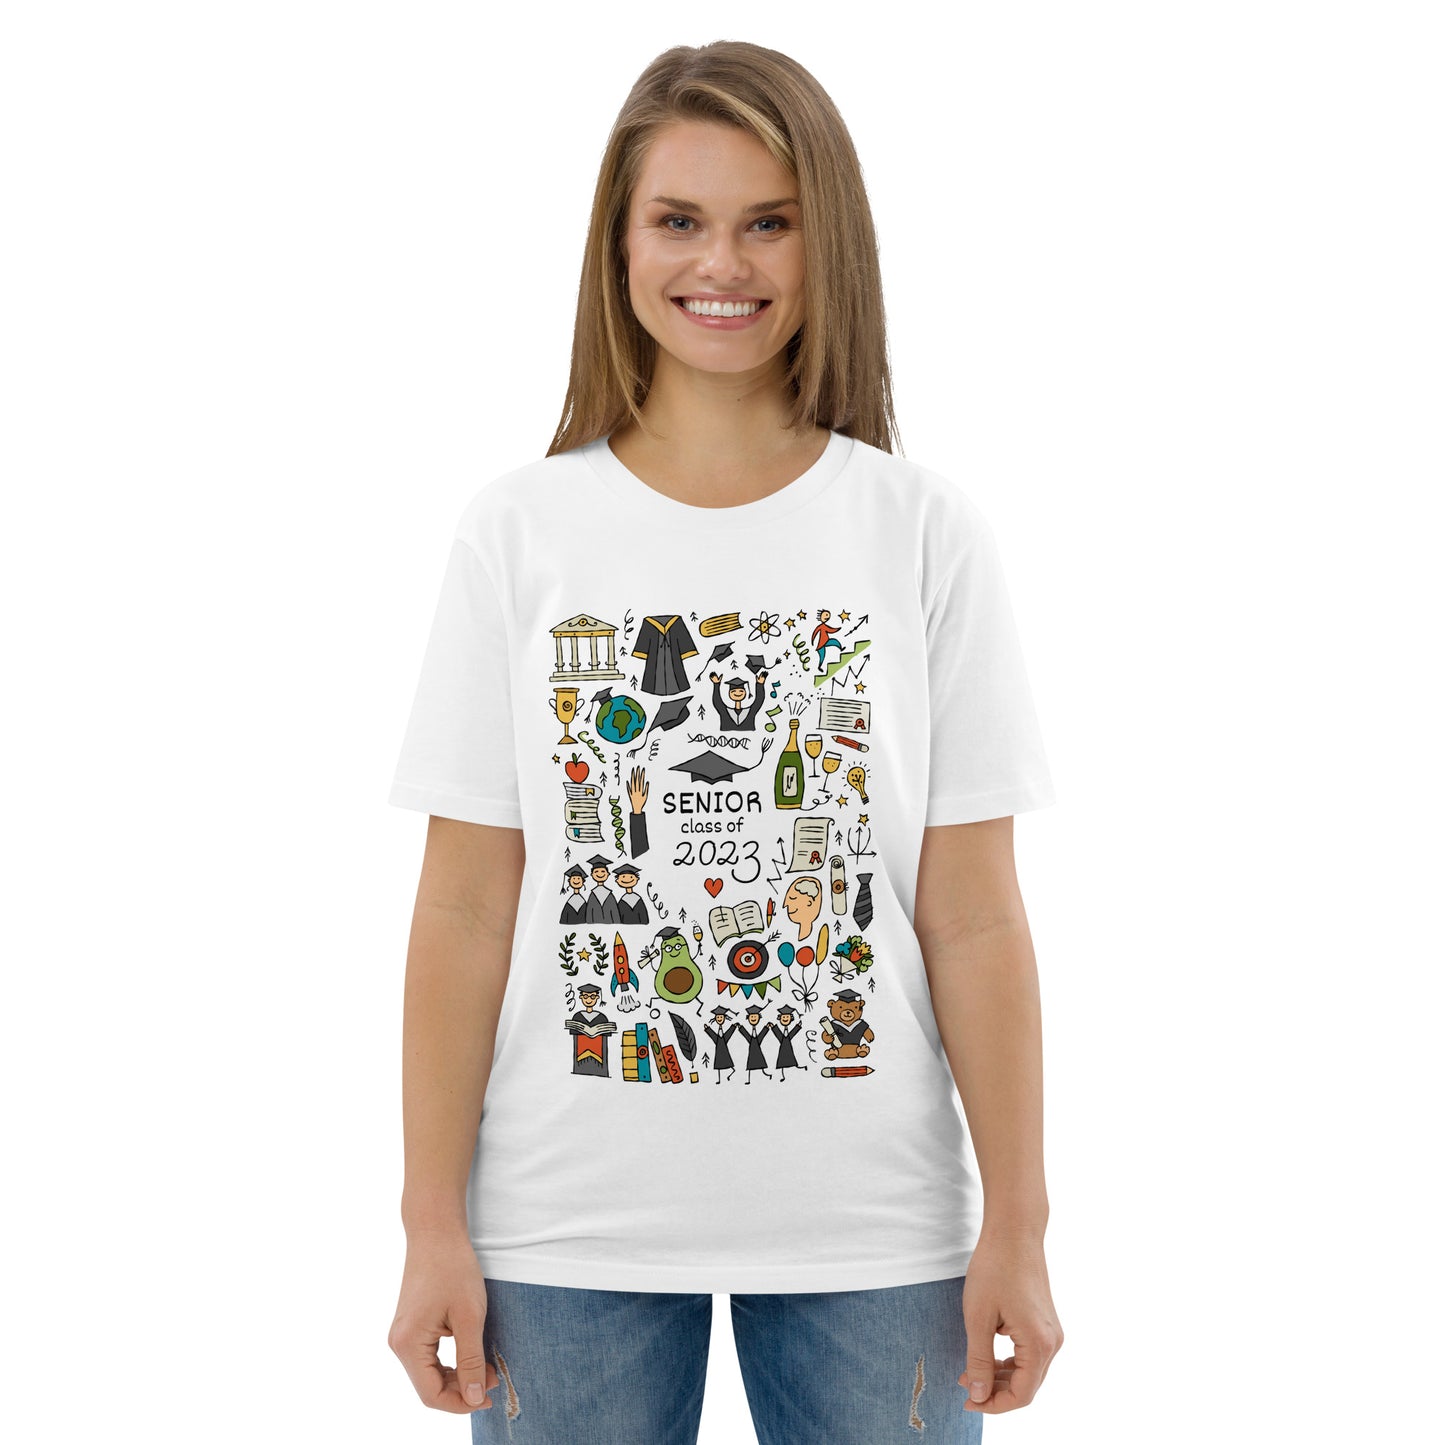 Girl in graduation white t-shirt with funny designer print featuring graduates in hats and mantles, holiday-themed motifs, and a graduation teddy bear. Personalise it with your text